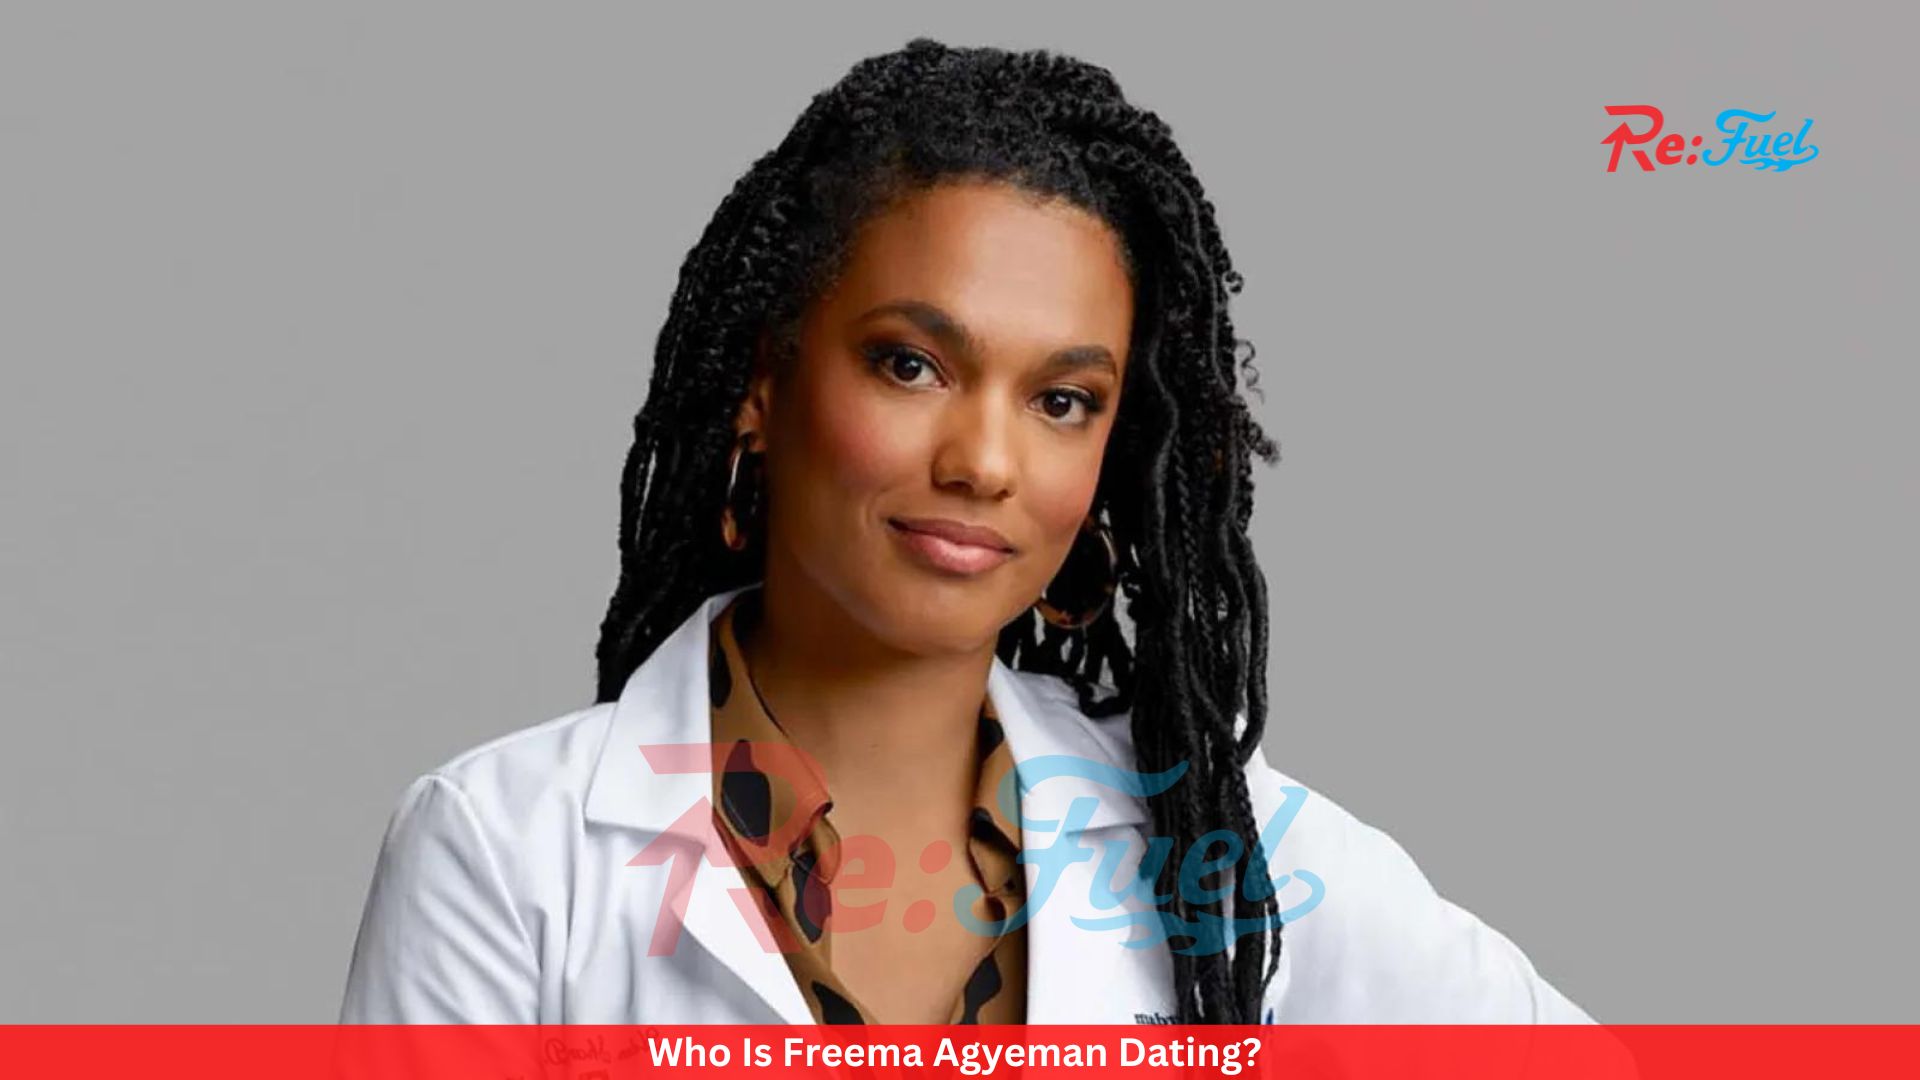 Who Is Freema Agyeman Dating?